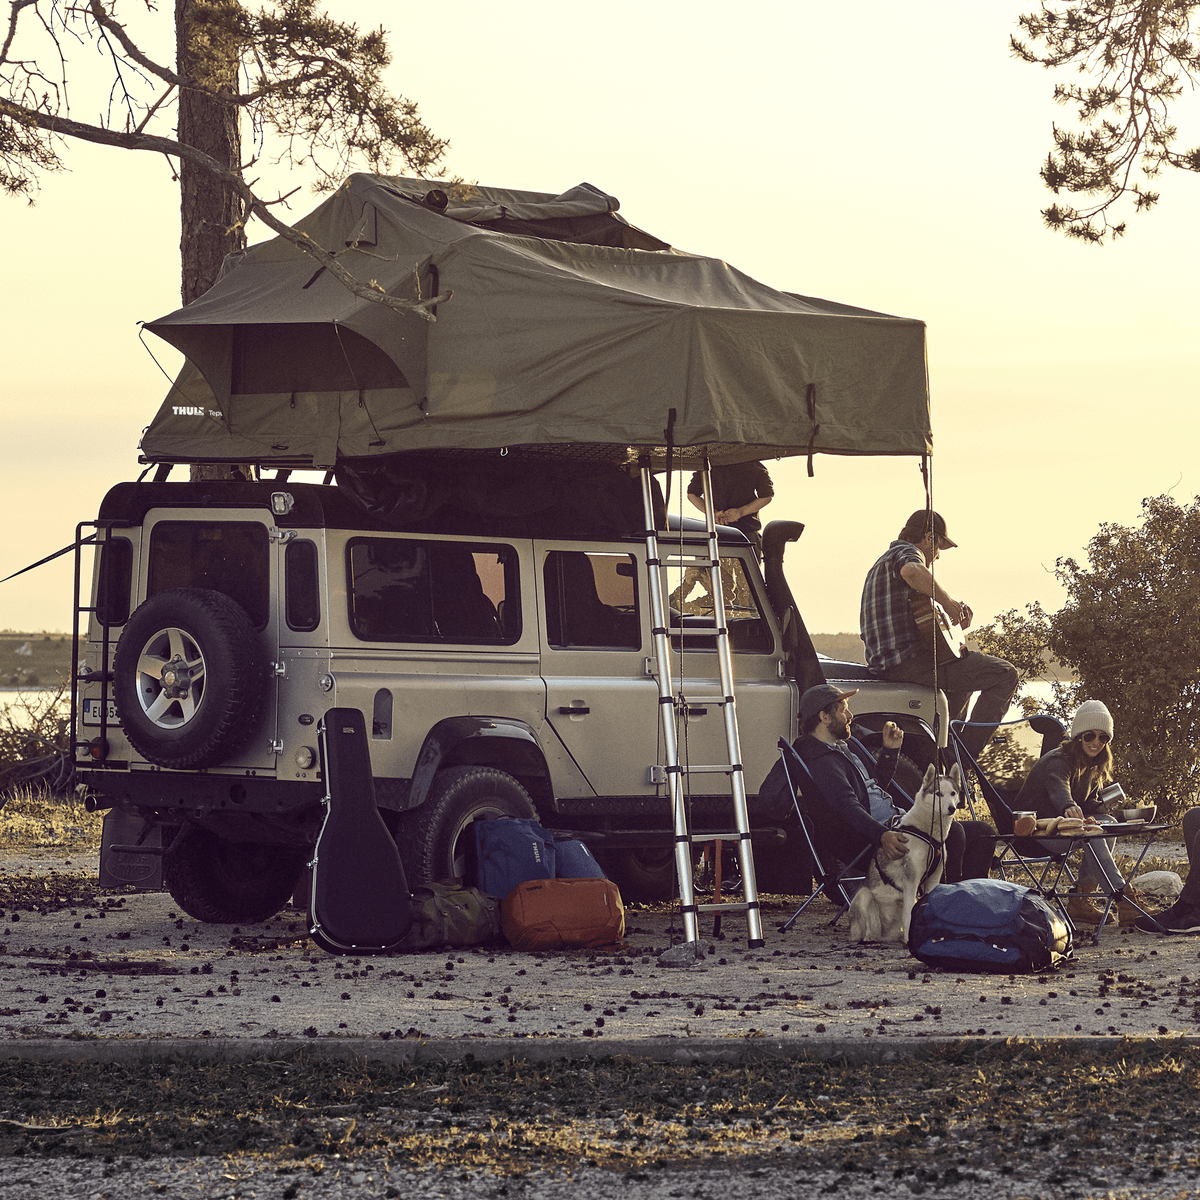 A group of people are standing in a forest beside a car with a Thule rooftop tent.